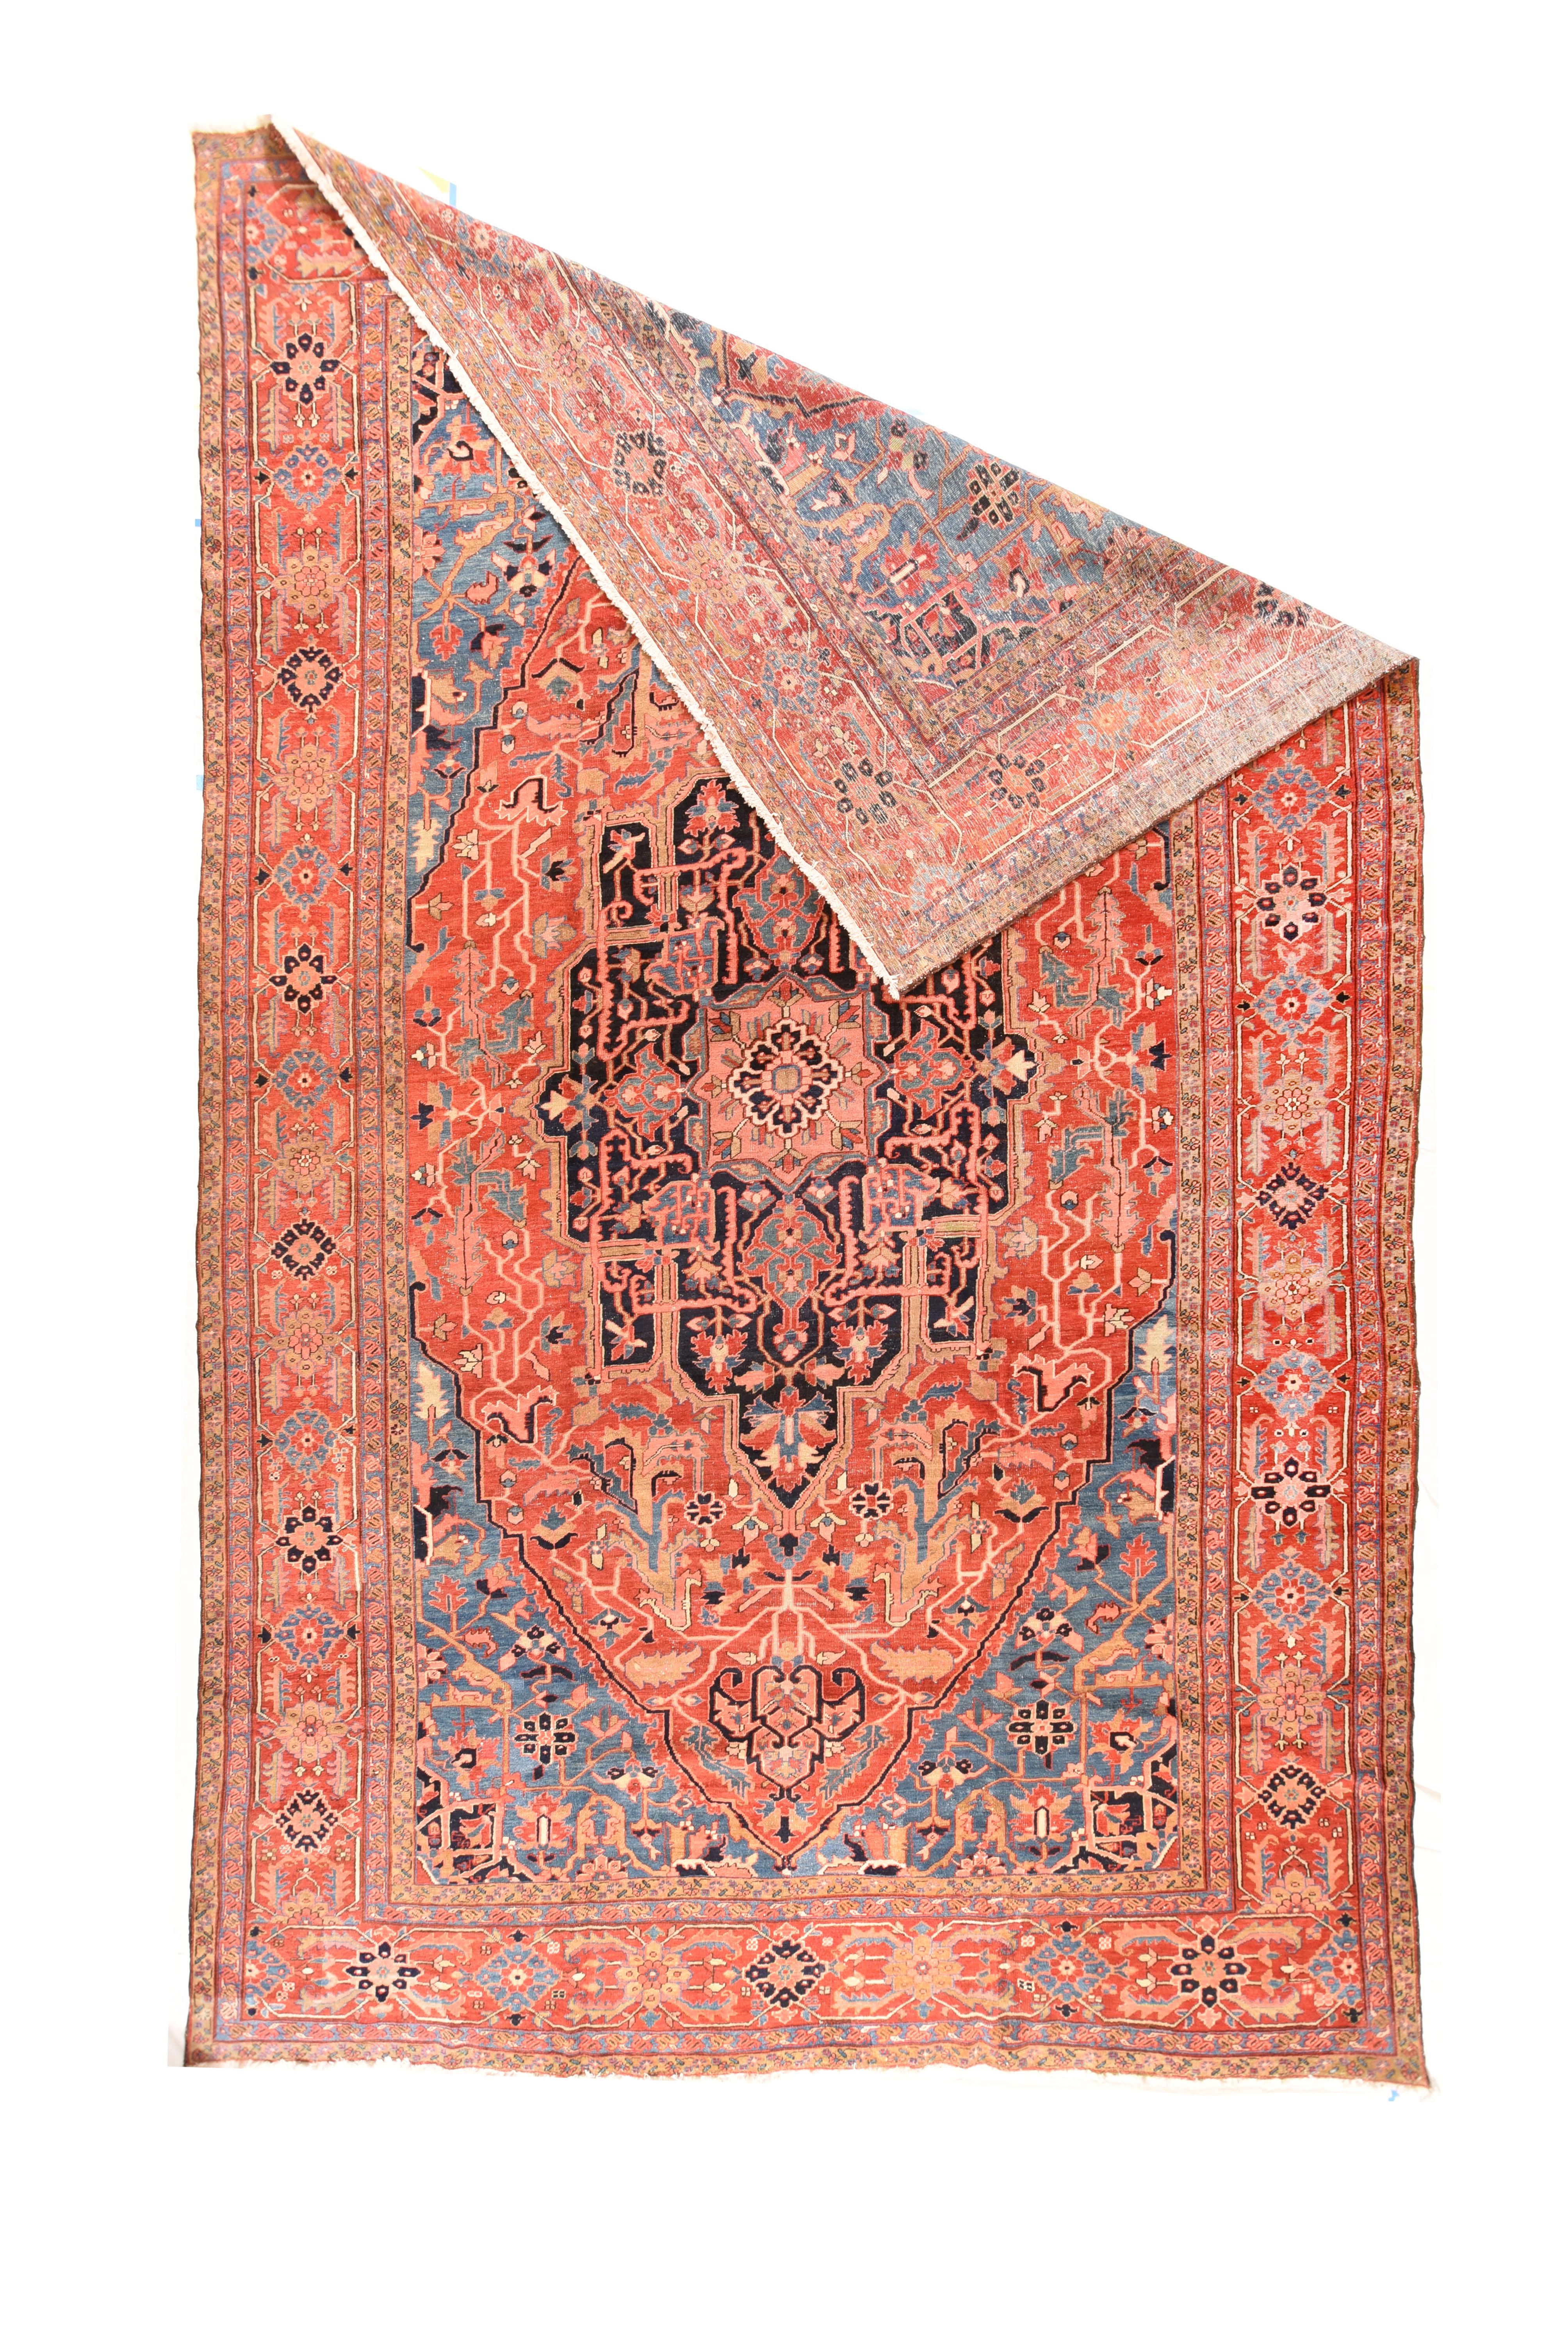 Antique Heriz Serapi Rug 11'7'' x 18'5''. This NW Persian village large carpet shows desirable abrashed sky blue corners properly [positioning a tomato madder field and a central have oval medallion with peripheral low points and flattened lobes.